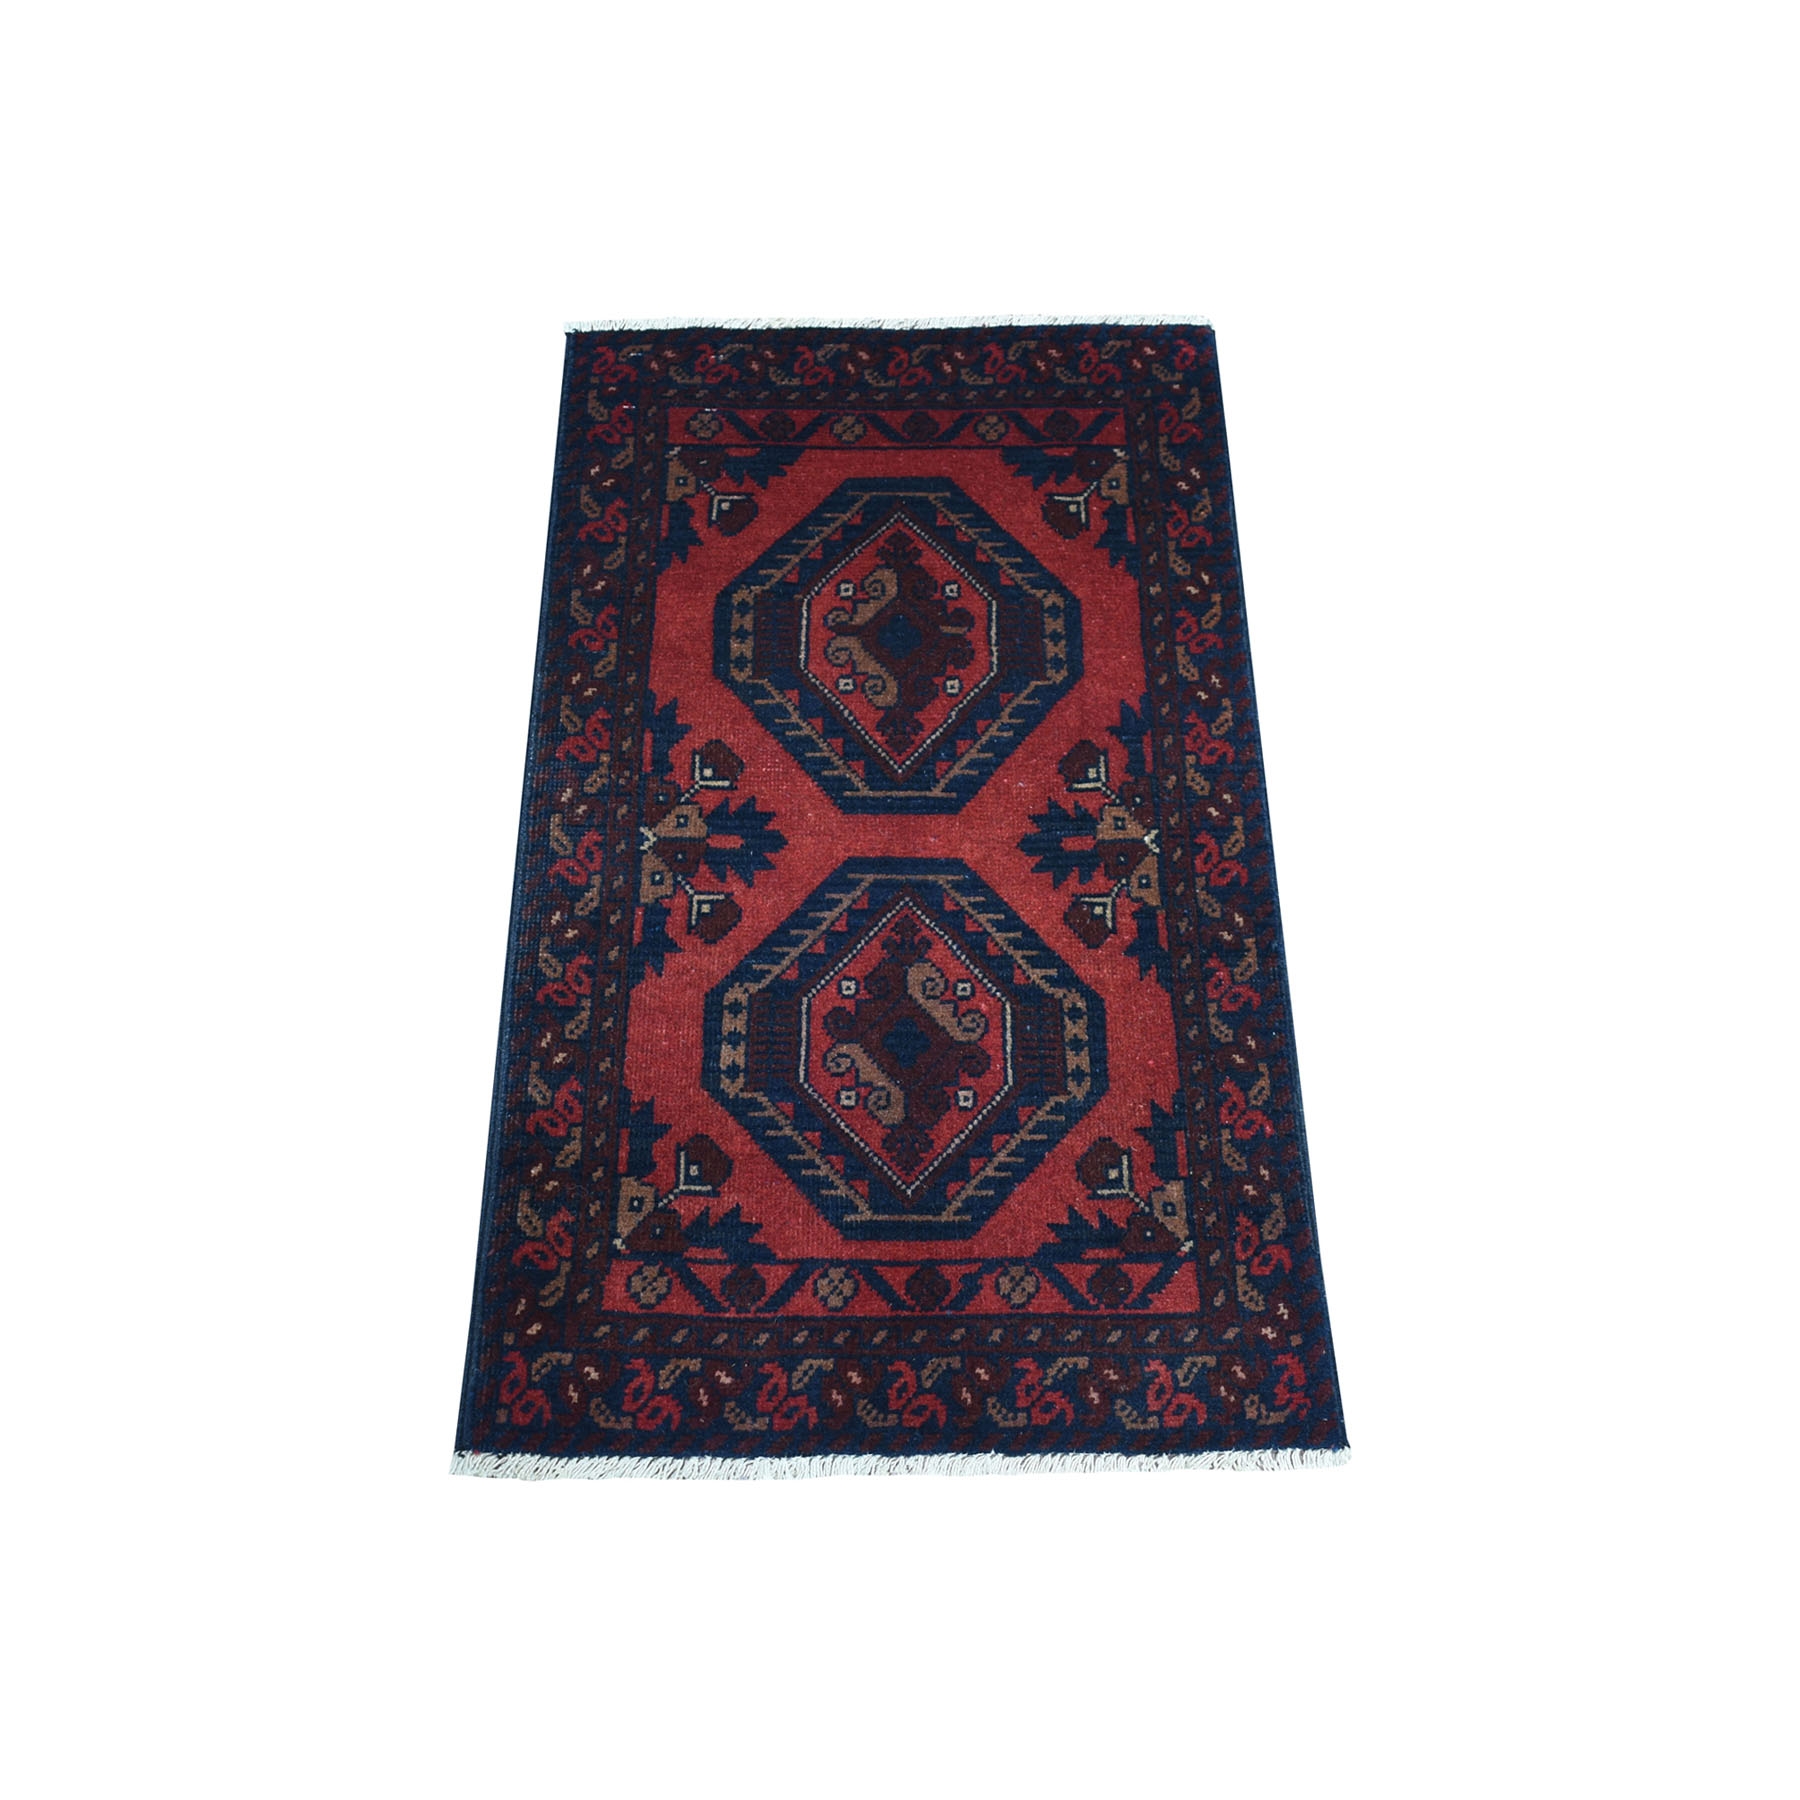 1'8"X3'2" Deep And Saturated Red Geometric Afghan Andkhoy Pure Wool Hand Knotted Oriental Rug moaec7ed